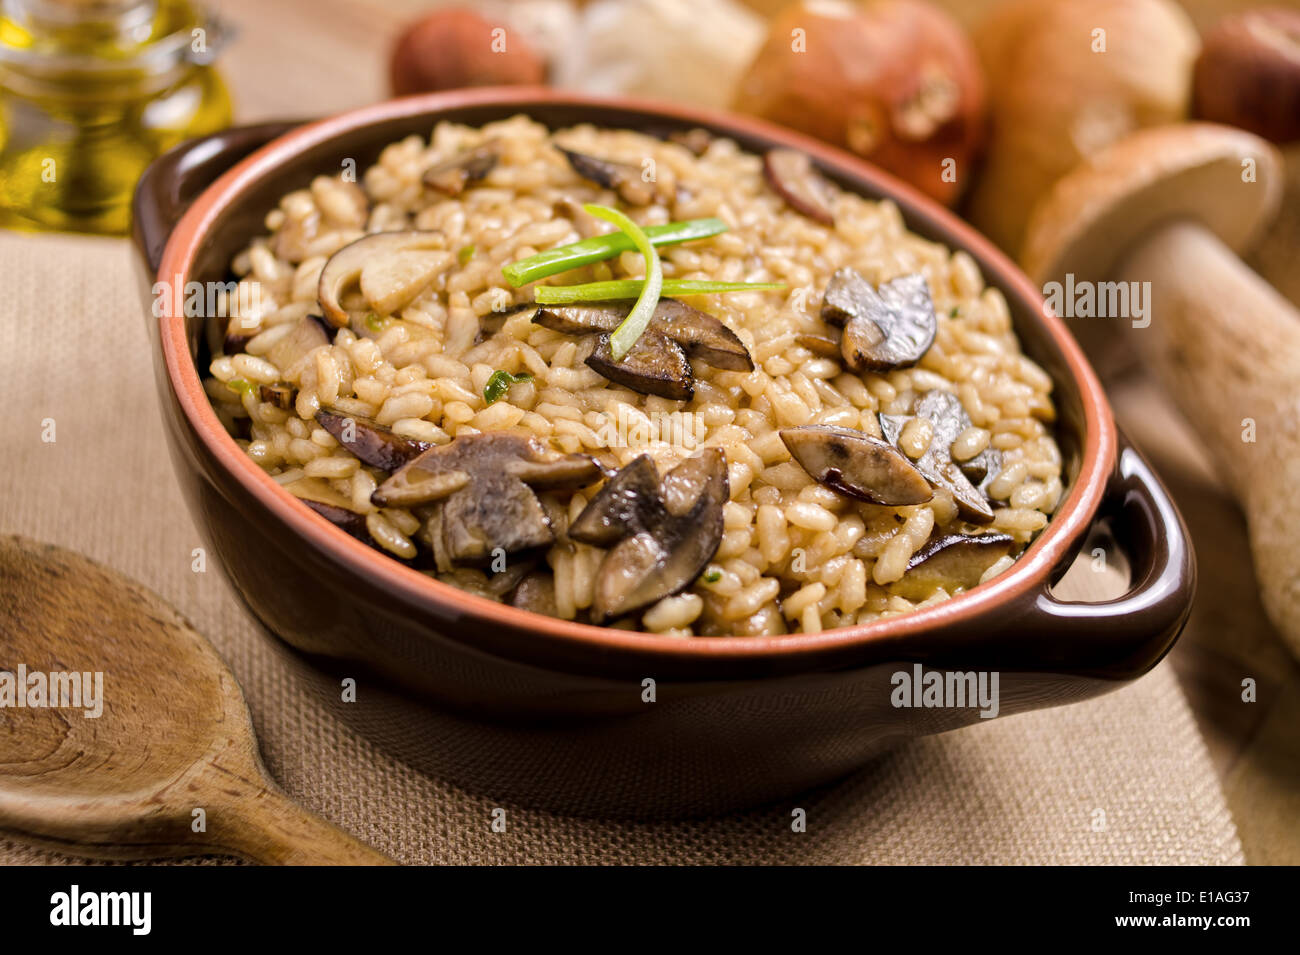 A bowl of wild mushroom risotto with arboreal rice and porcini mushrooms. Stock Photo